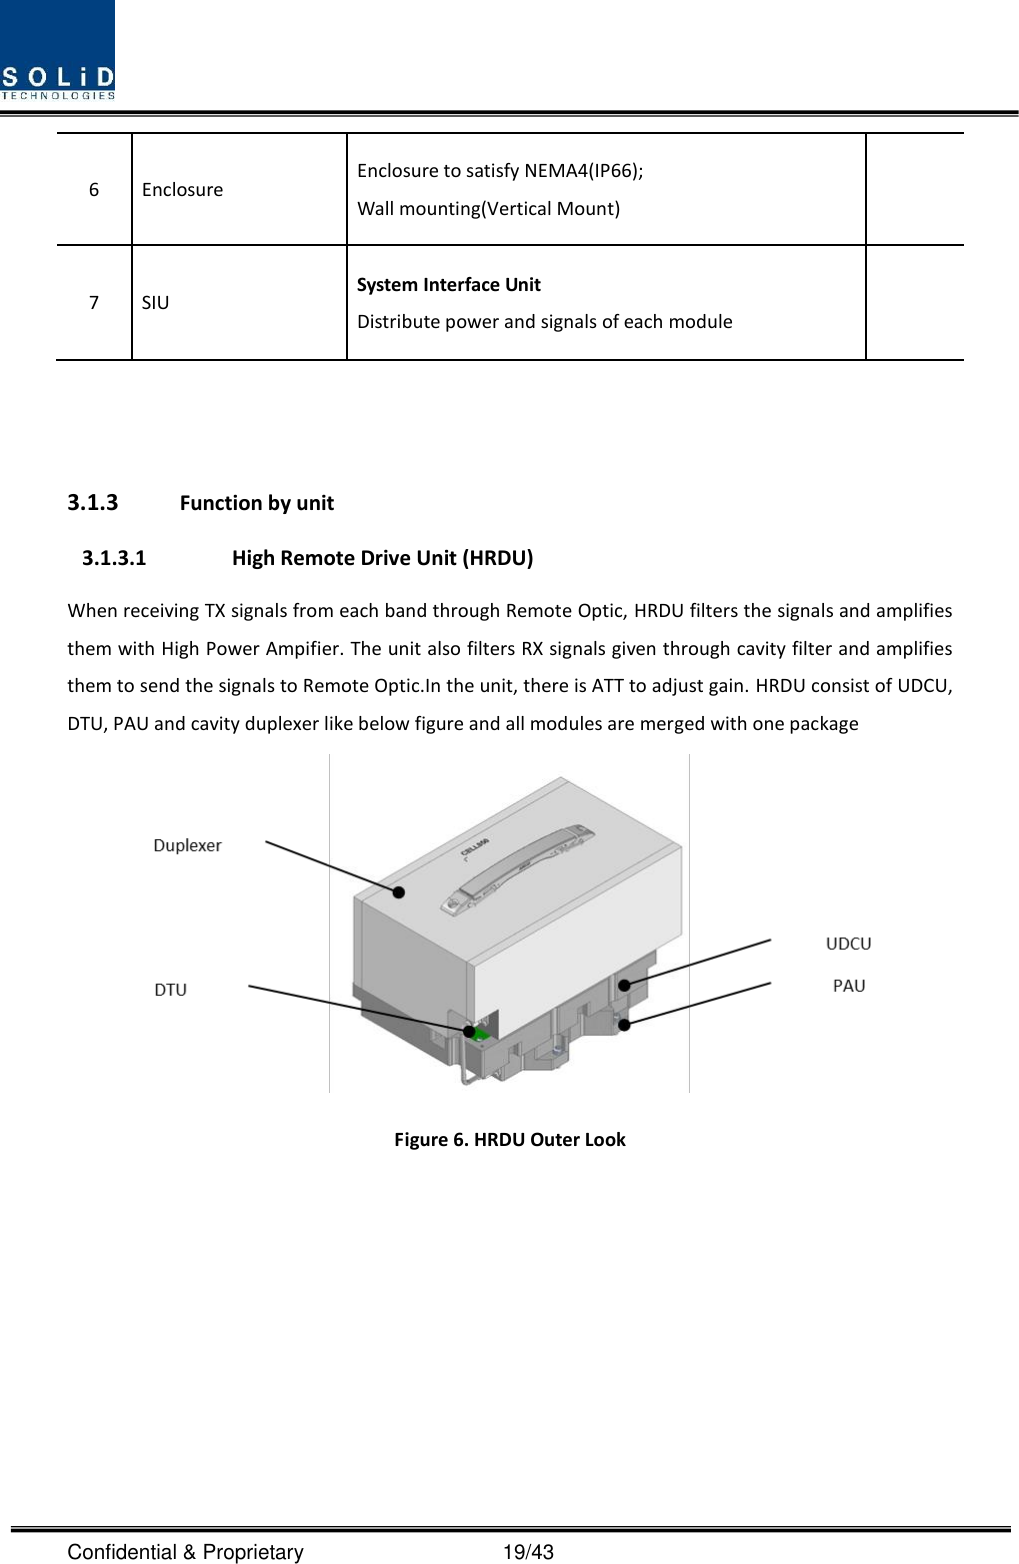  Confidential &amp; Proprietary                                      19/43 6 Enclosure Enclosure to satisfy NEMA4(IP66);   Wall mounting(Vertical Mount)  7 SIU System Interface Unit Distribute power and signals of each module       3.1.3 Function by unit 3.1.3.1 High Remote Drive Unit (HRDU) When receiving TX signals from each band through Remote Optic, HRDU filters the signals and amplifies them with High Power Ampifier. The unit also filters RX signals given through cavity filter and amplifies them to send the signals to Remote Optic.In the unit, there is ATT to adjust gain. HRDU consist of UDCU, DTU, PAU and cavity duplexer like below figure and all modules are merged with one package  Figure 6. HRDU Outer Look         